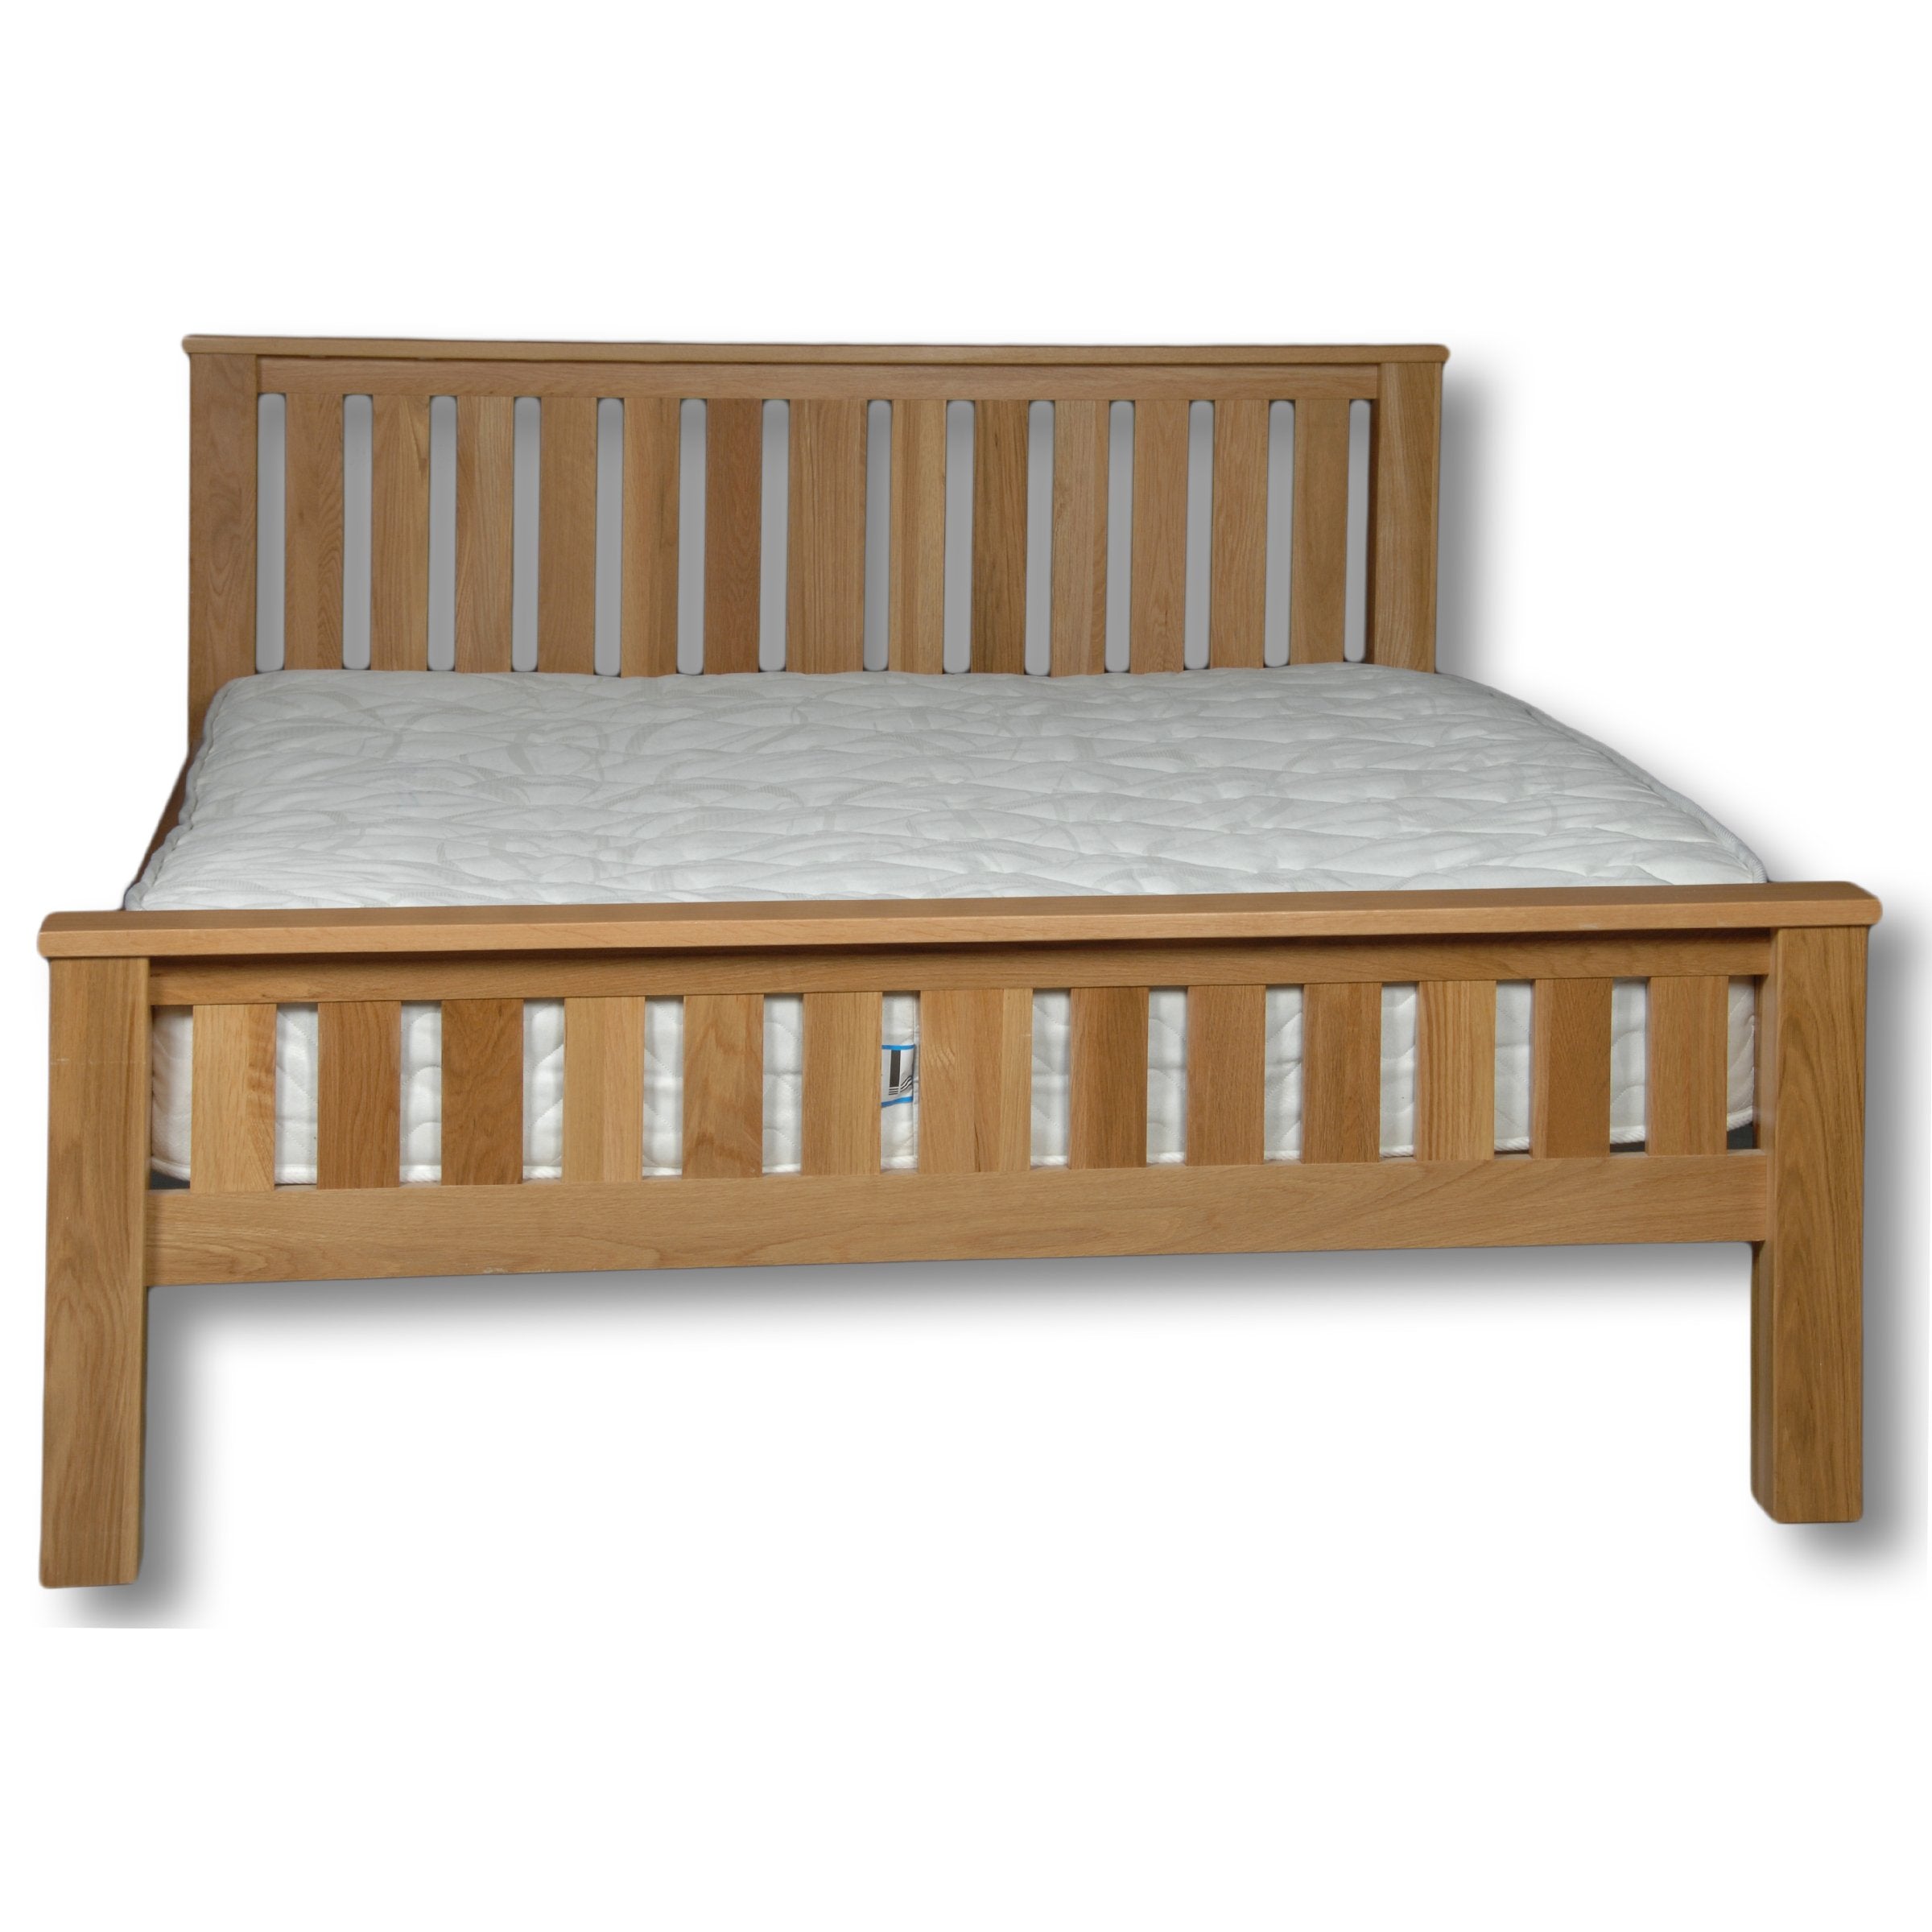 Manhattan Solid Oak Bed Frame, Solid Oak Bed with Thick Pine Slats & Centre Support., Easy Assembly Solid Oak Bed